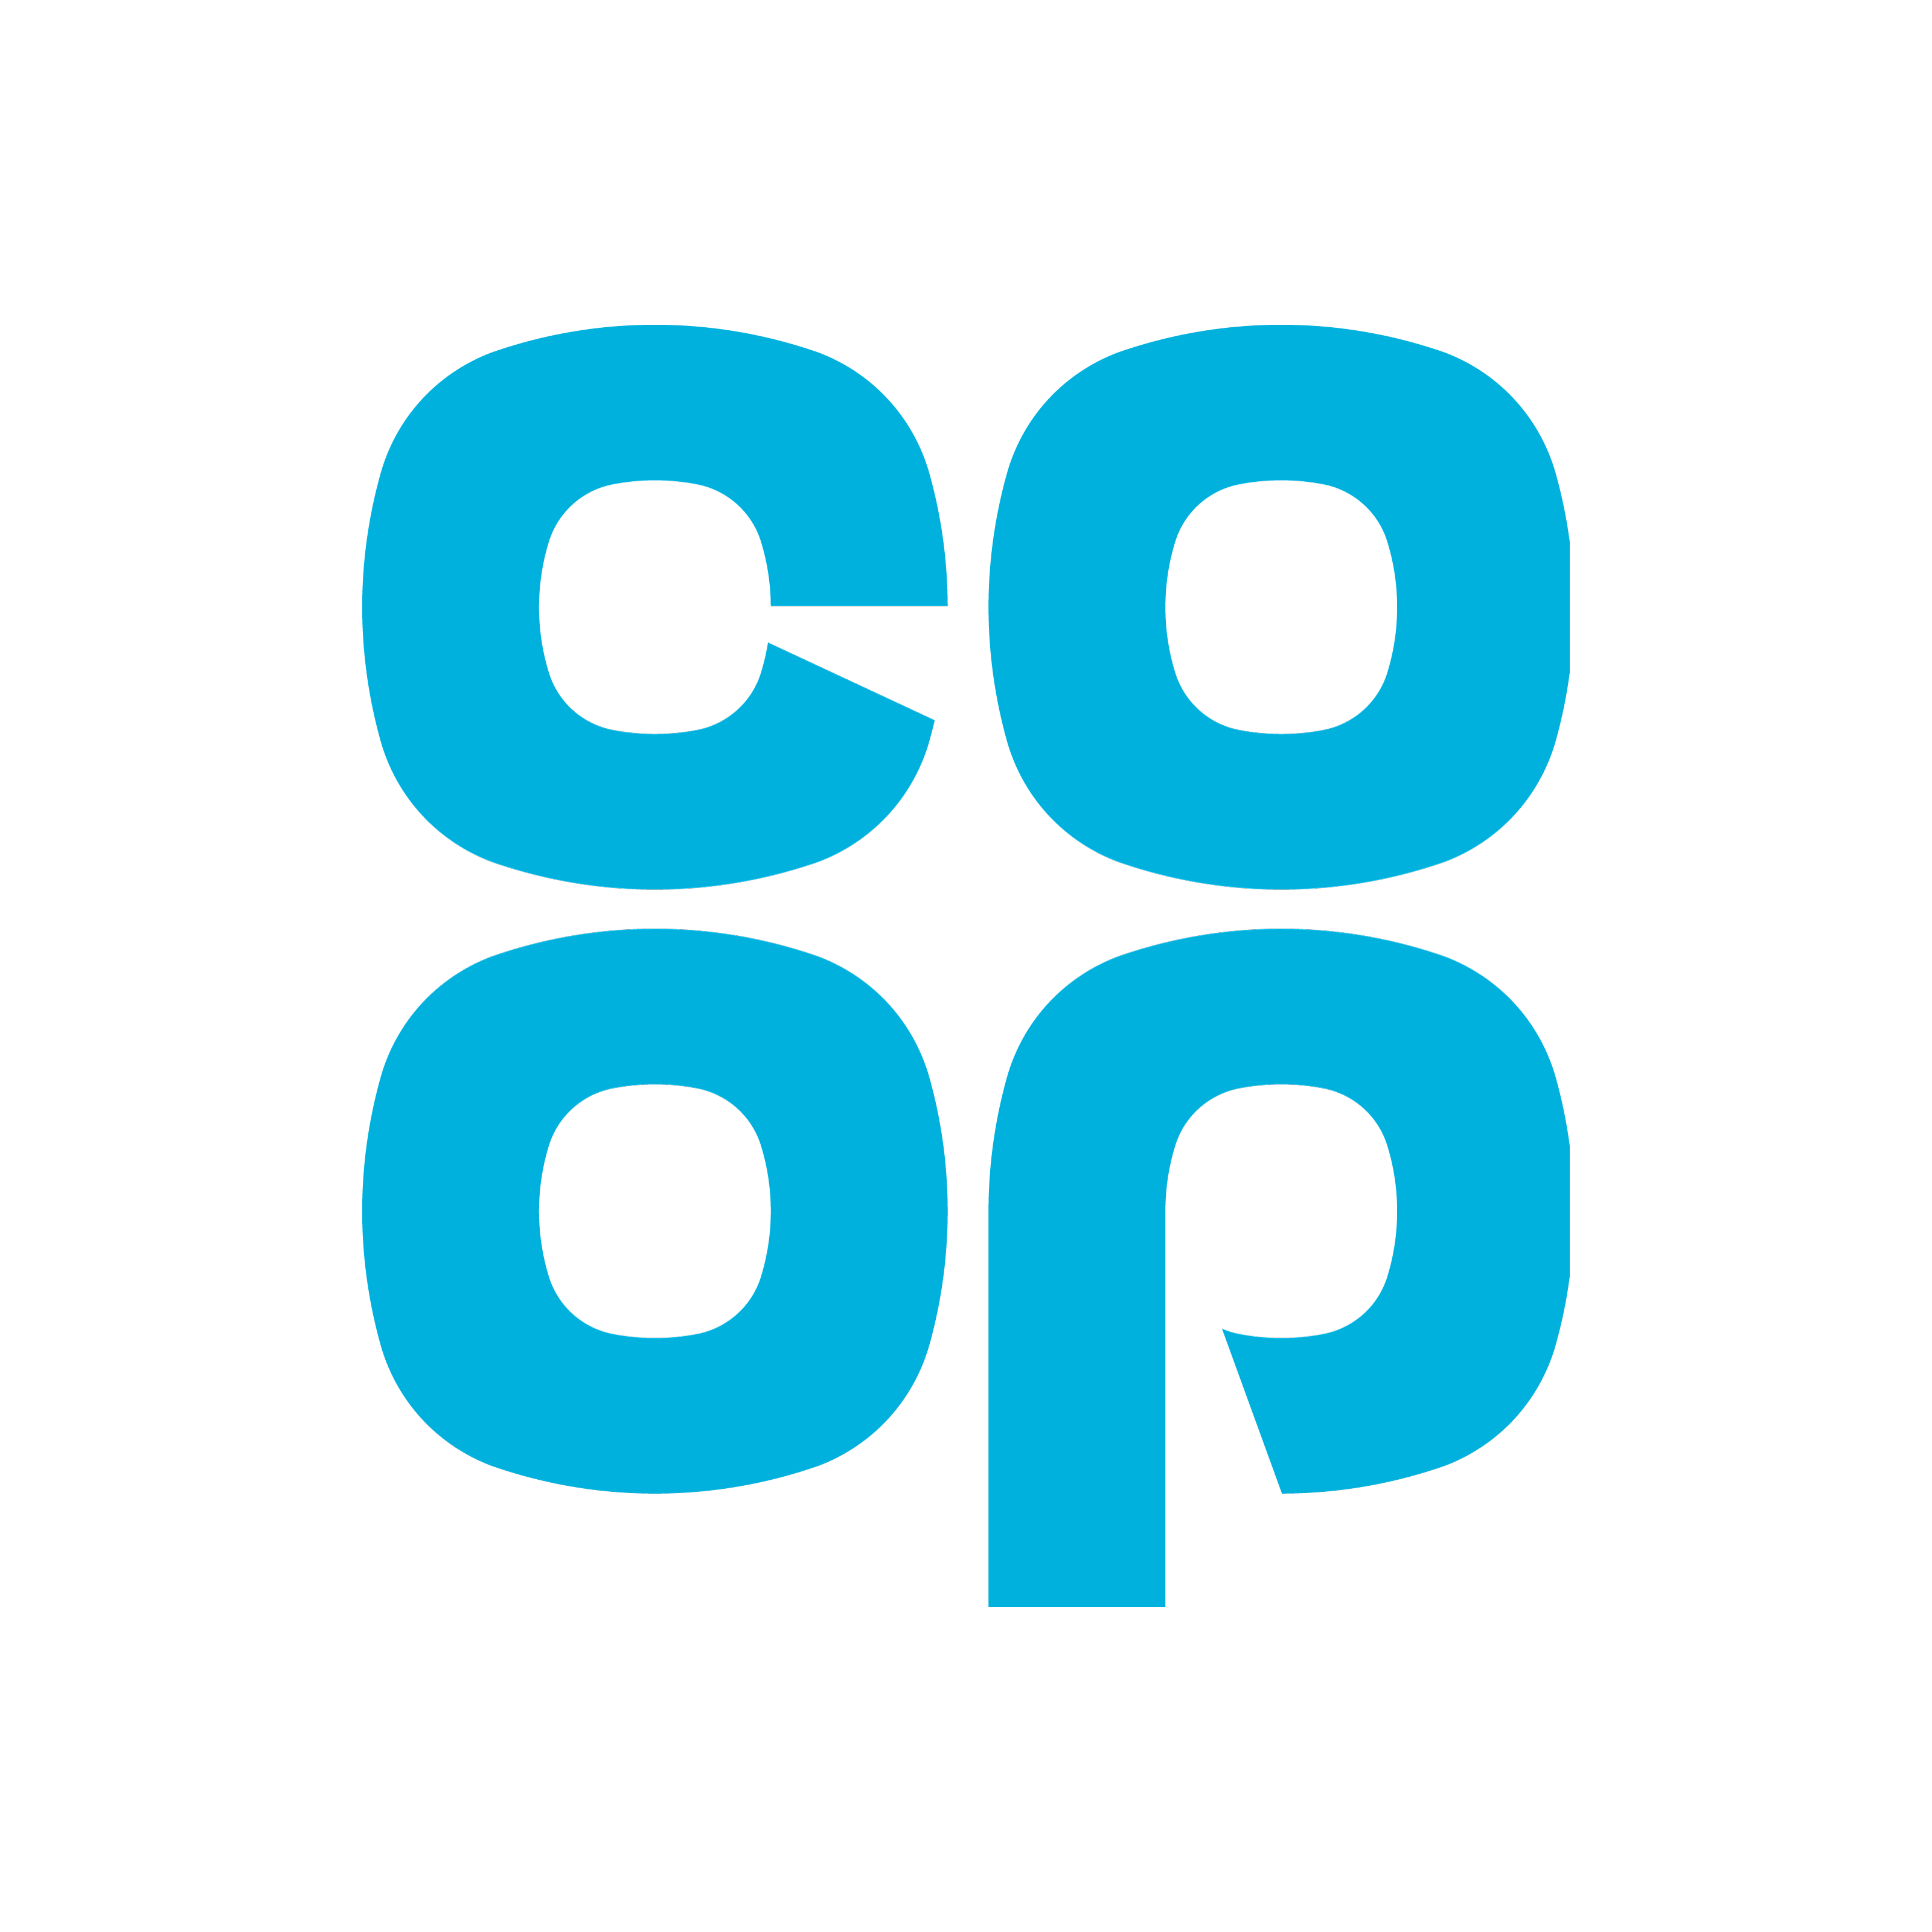 Cooperative Logo - The Co Operative Group